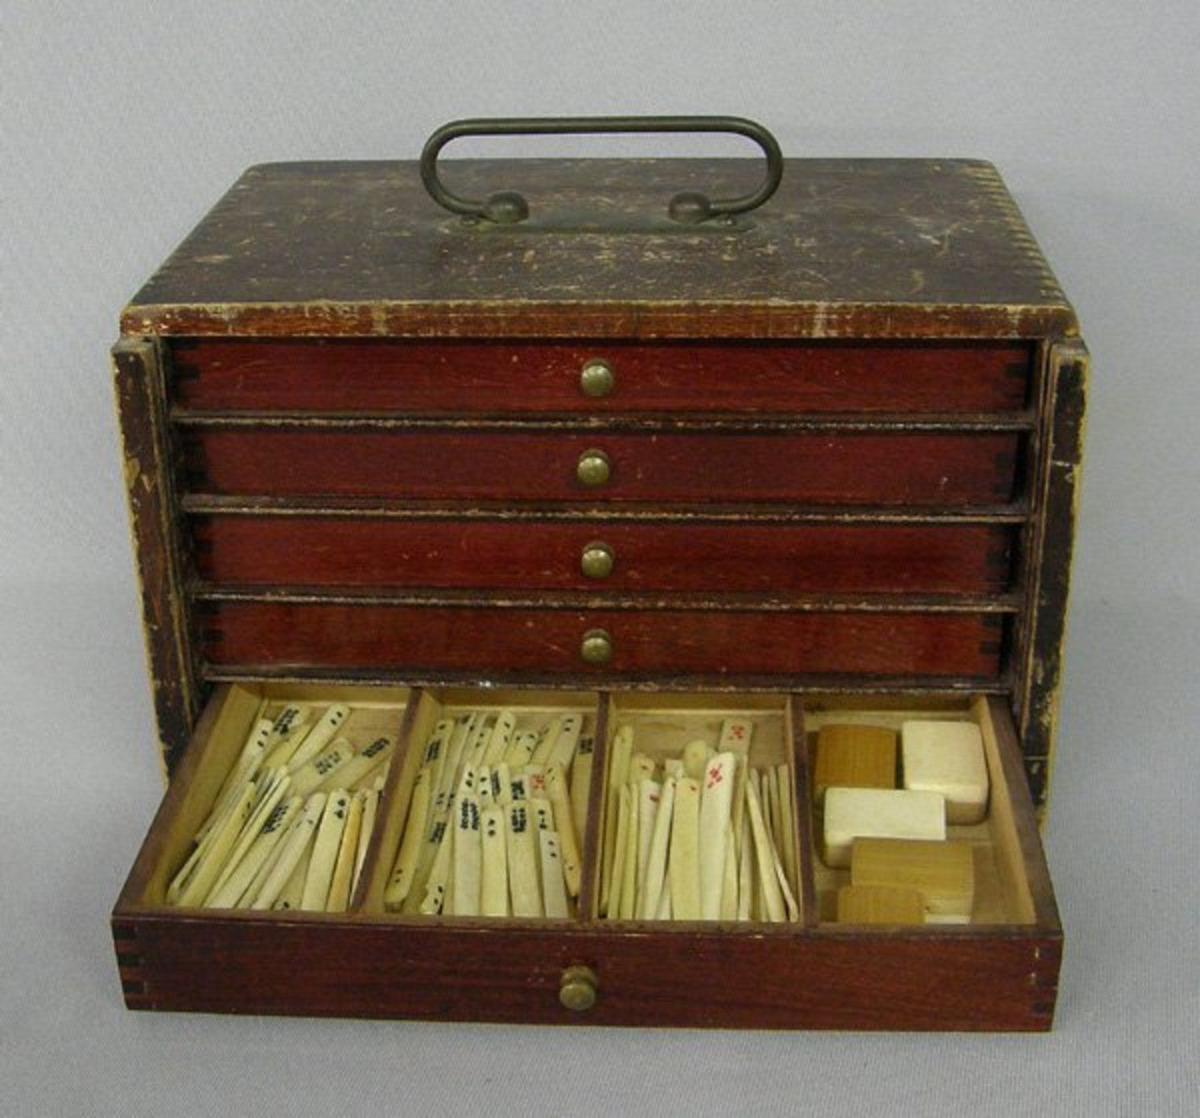 Antique Mahjong Sets: An Antidote to Our Antisocial Internet